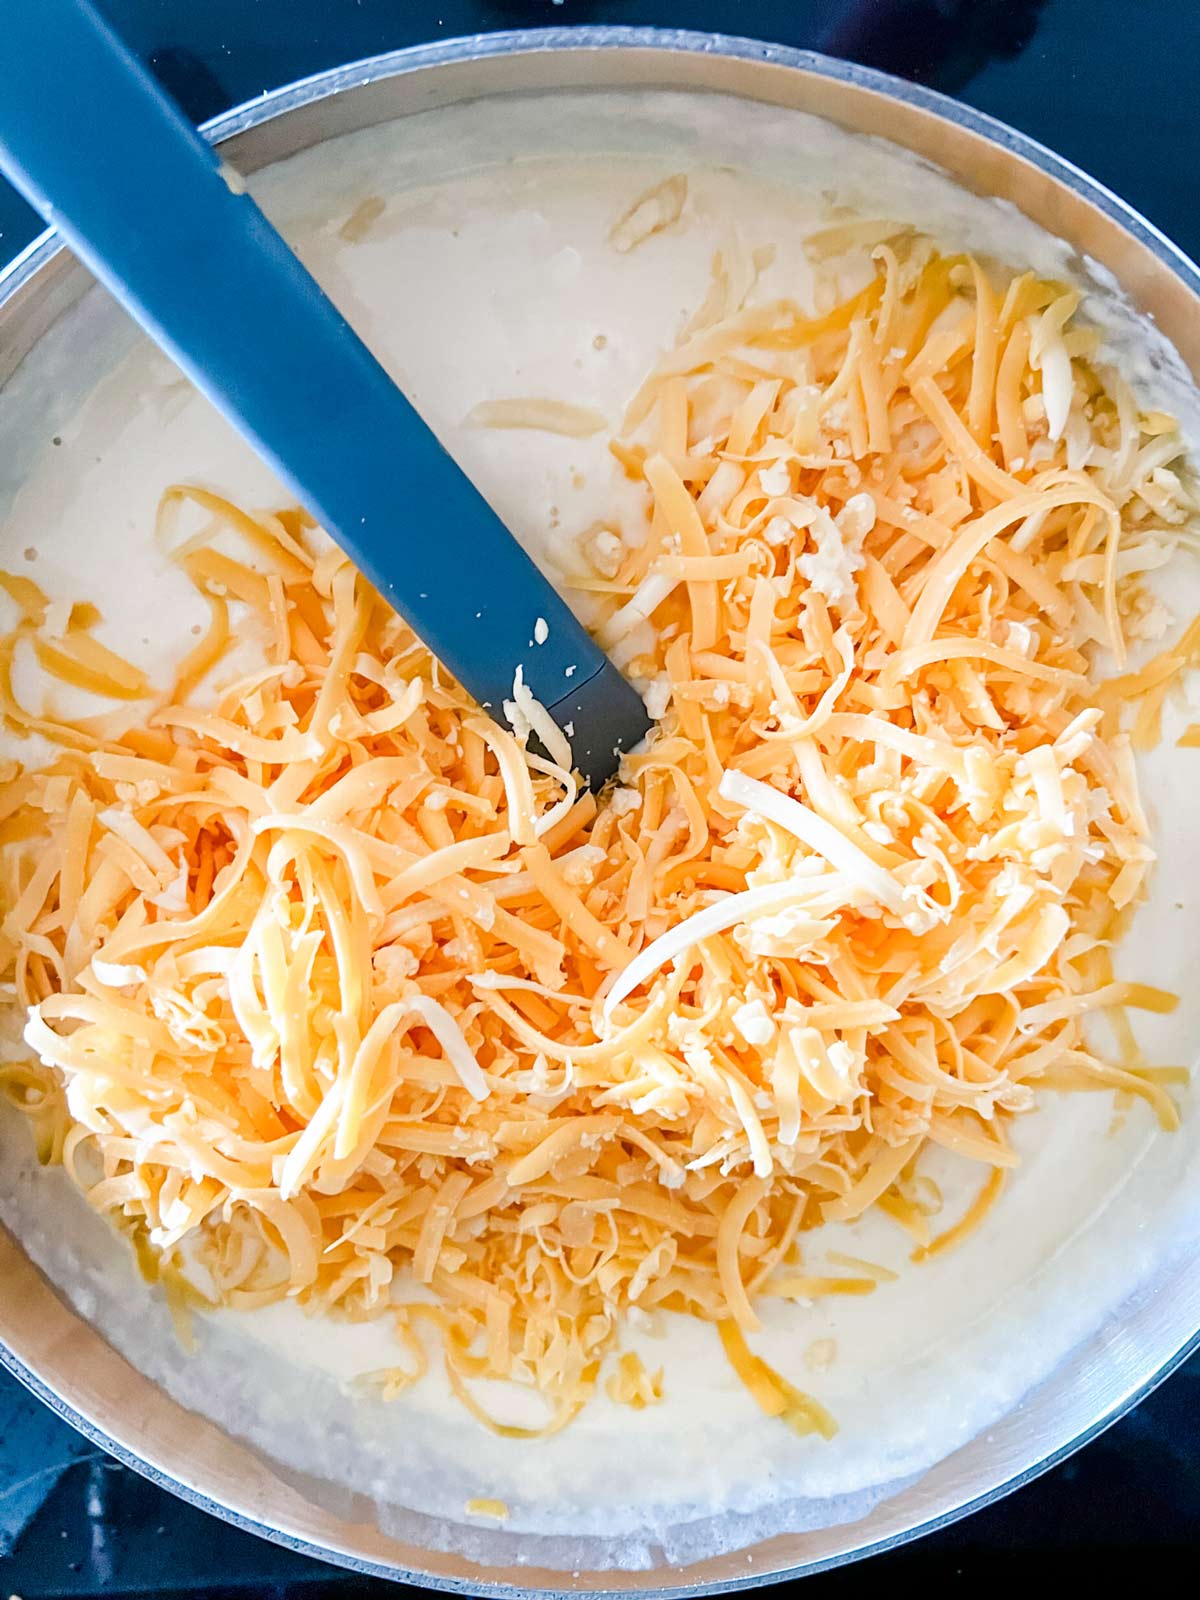 Shredded cheese being added to a cream sauce.